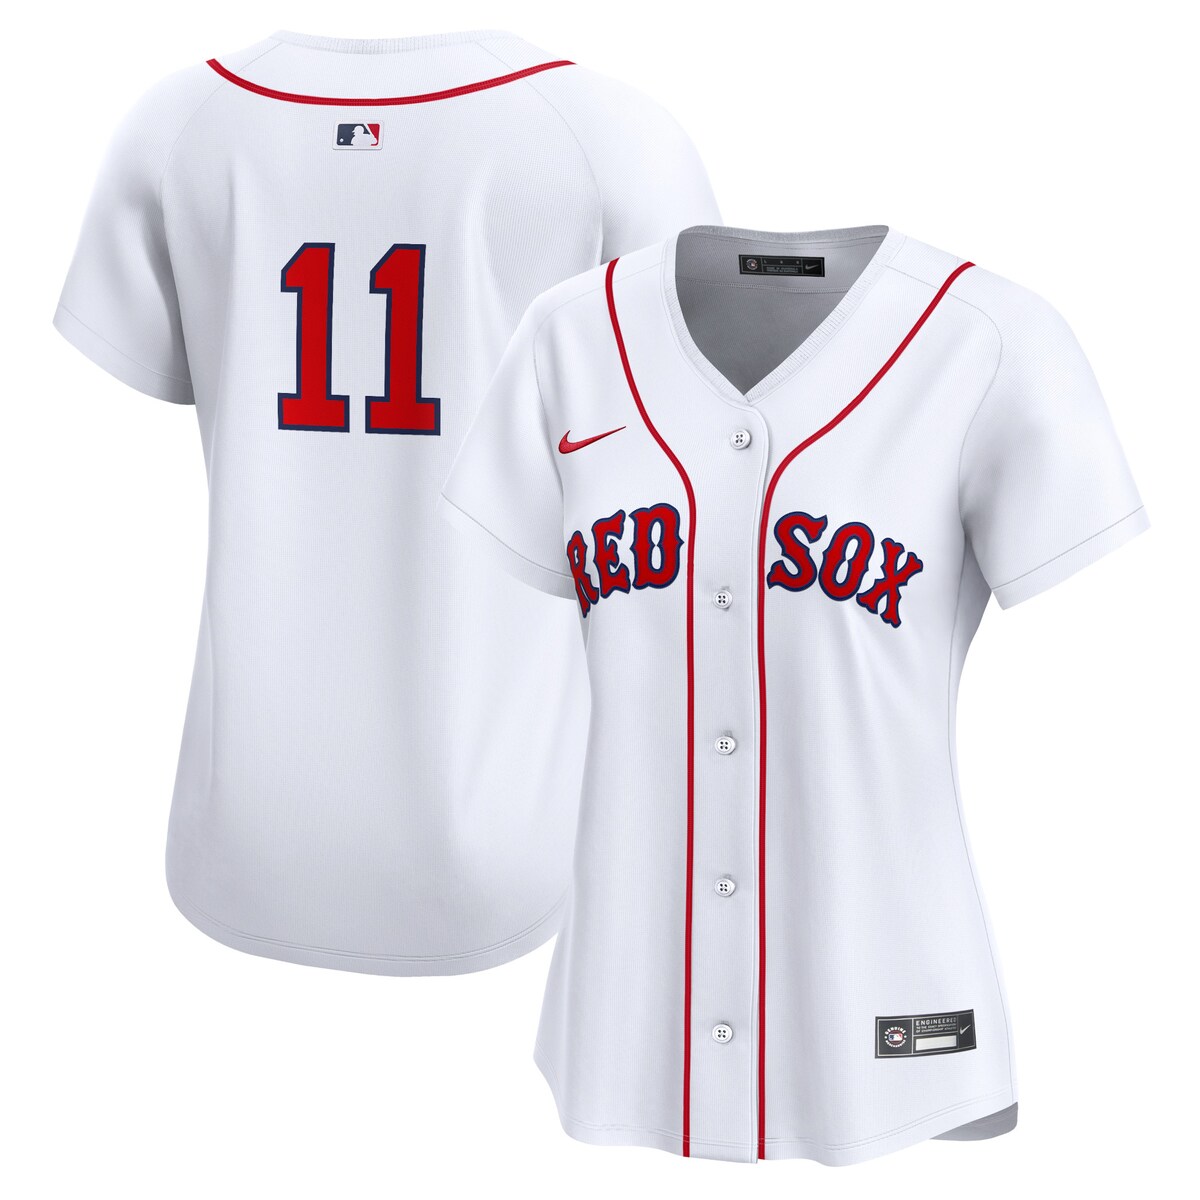 MLB bh\bNX t@GEf@[X ~ebh jtH[ Nike iCL fB[X zCg (2024 Nike Women's Limited Player Jerseys - FTF NTP Master Style)